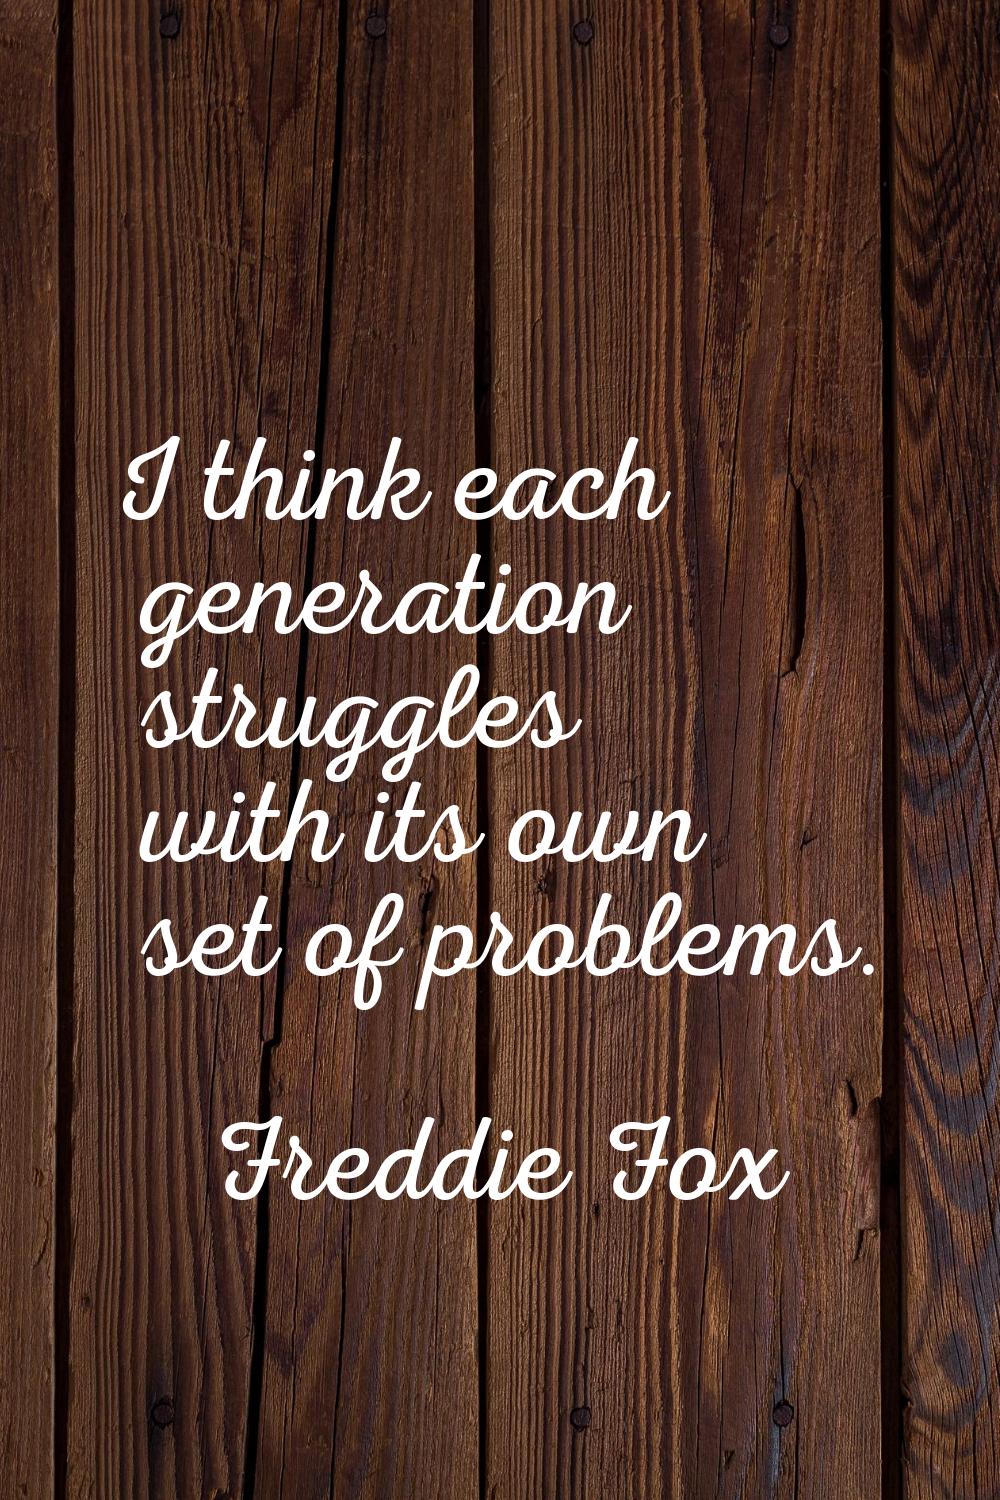 I think each generation struggles with its own set of problems.